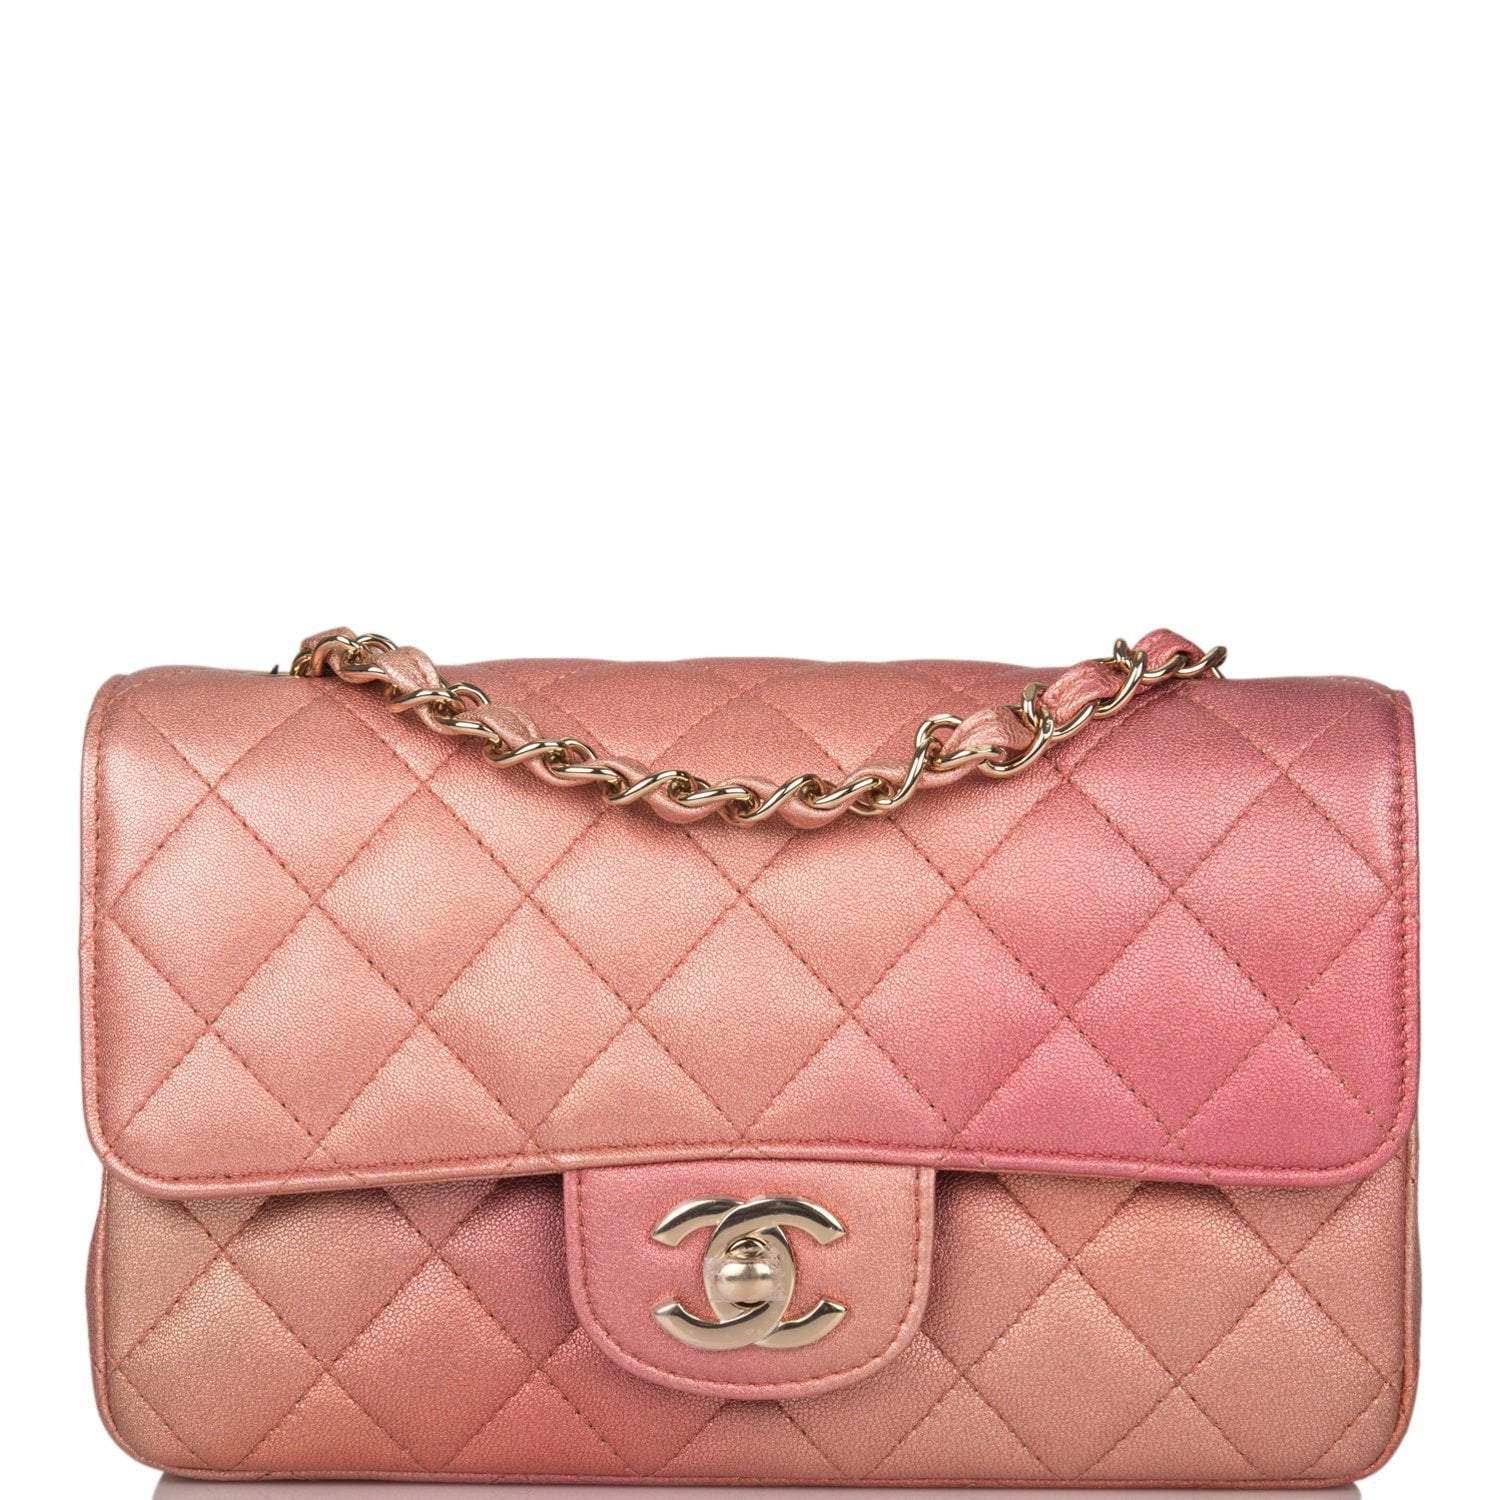 Chanel Pink Ombre Quilted Metallic Lambskin Rectangular Mini Classic Flap Bag Light Gold Hardware